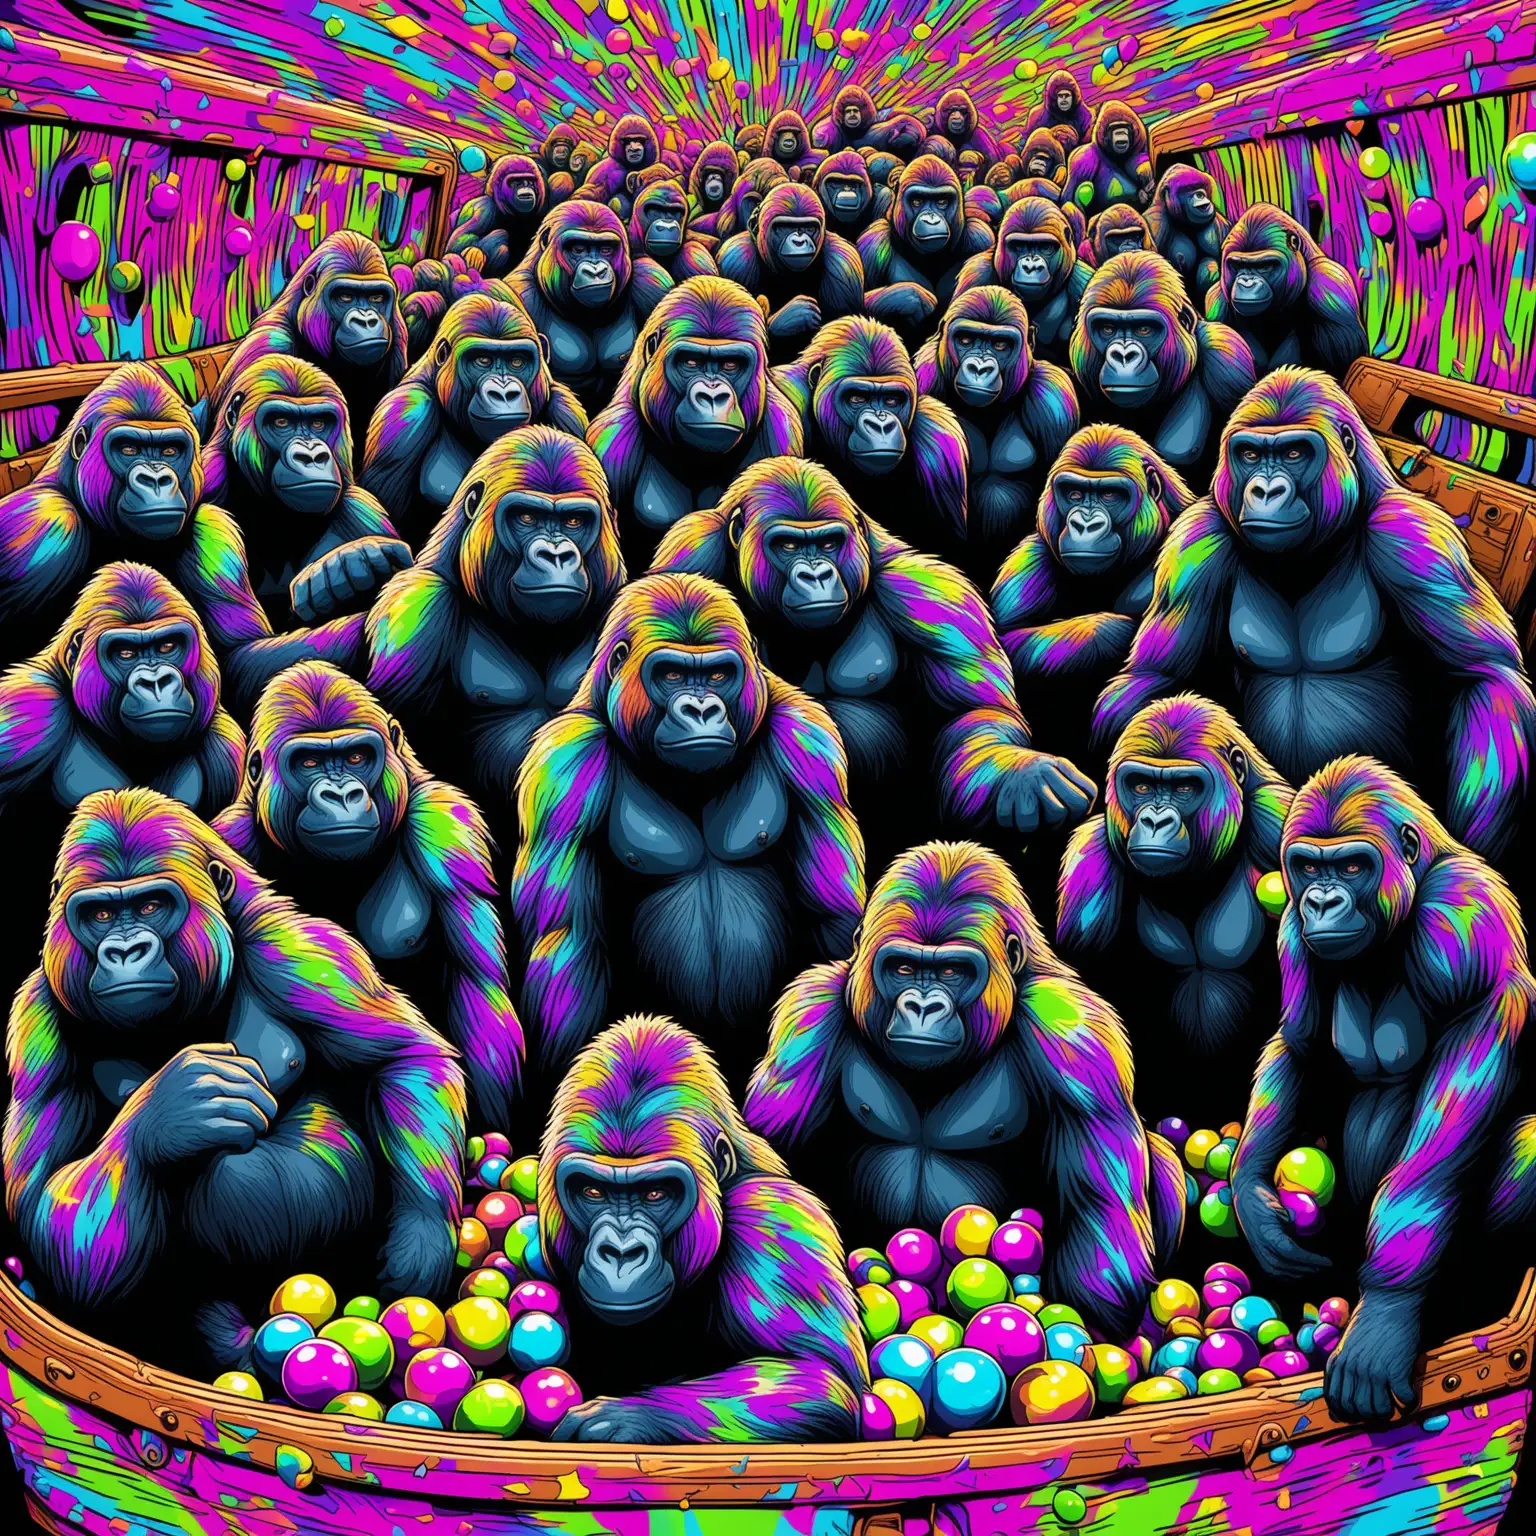 Psychedelic Gorillas Partying in the Trunk Intense and Harsh Contrasts